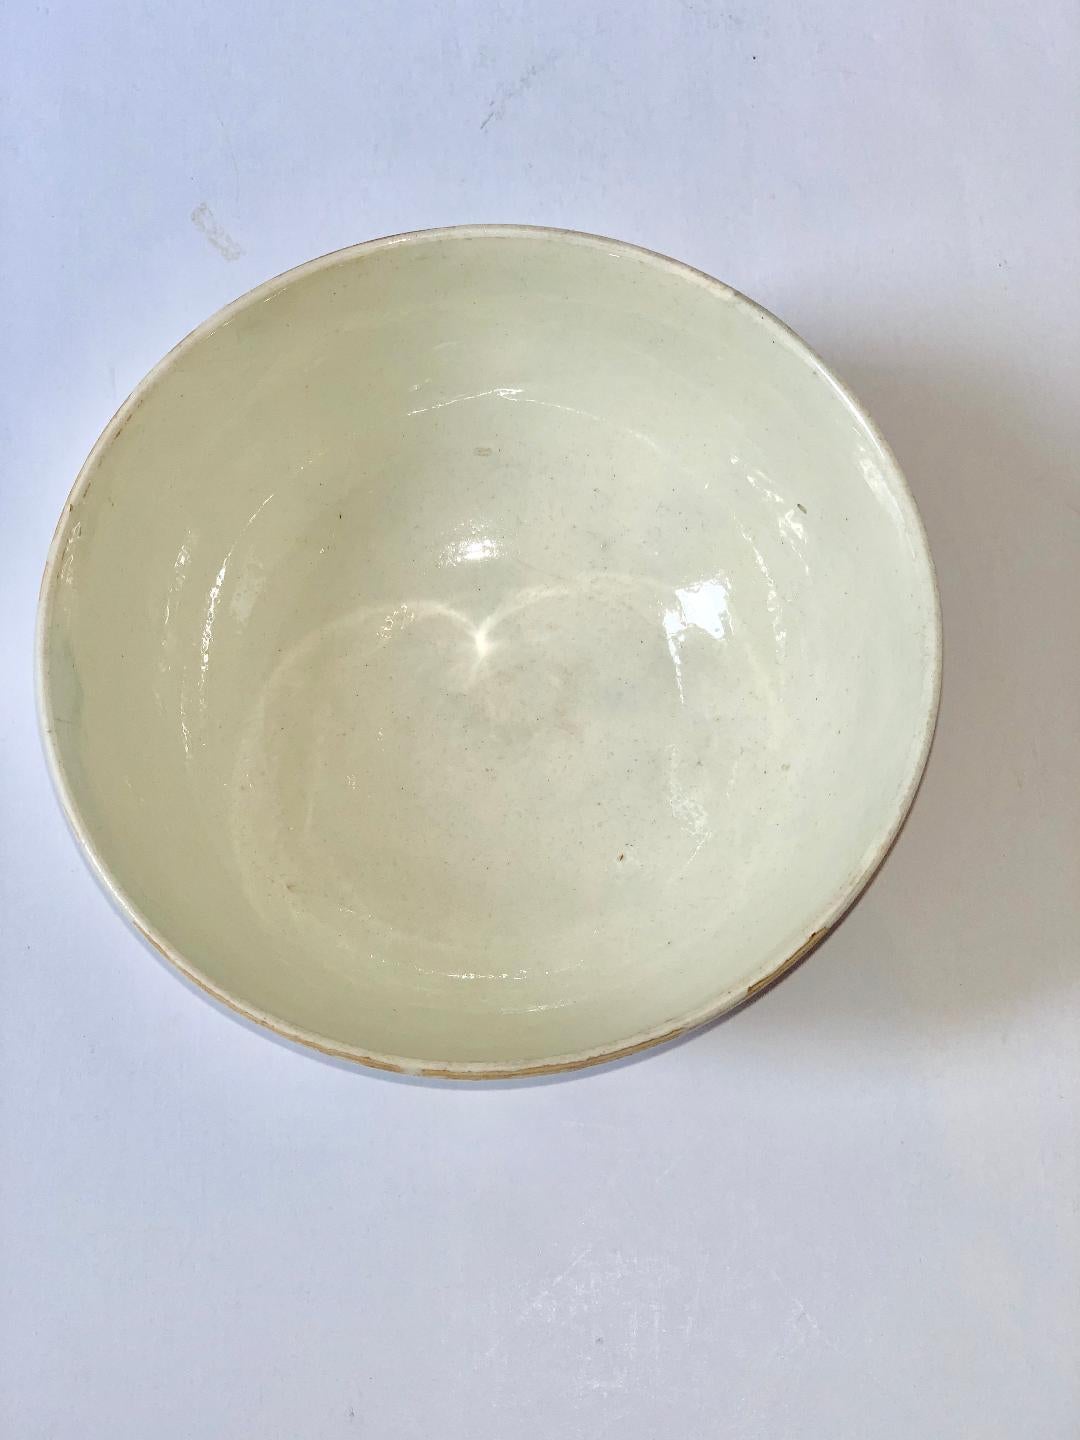 Mochaware Bowl with Dipped Fan Decoration Made in England, circa 1800 1